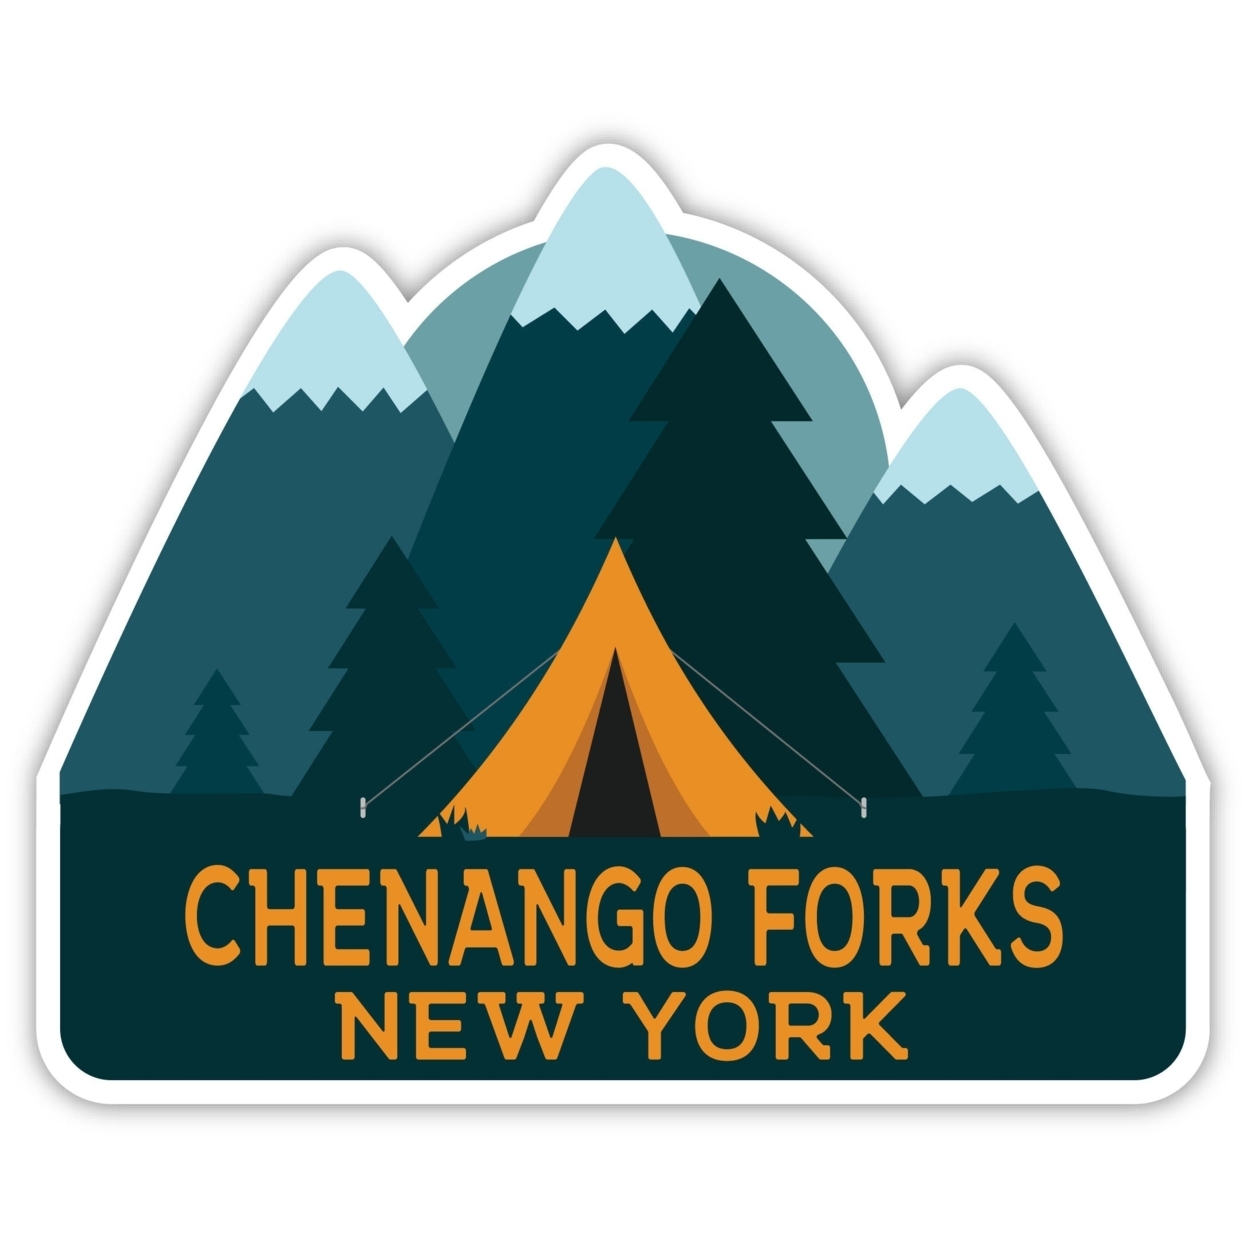 Chenango Forks New York Souvenir Decorative Stickers (Choose Theme And Size) - 4-Pack, 10-Inch, Tent